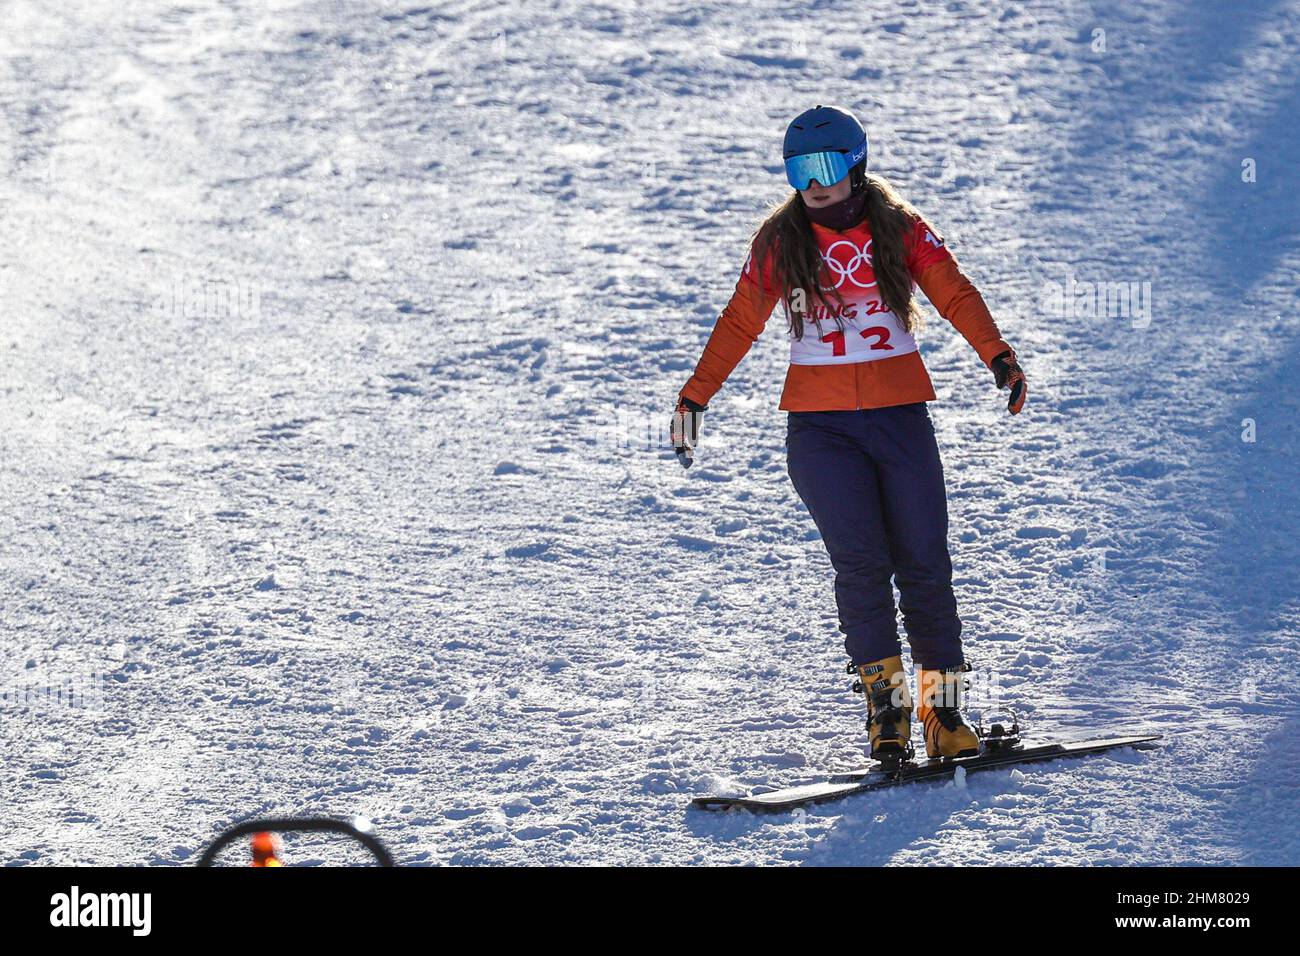 Zhangjiakou, China. 08th Feb, 2022. ZHANGJIAKOU, CHINA - FEBRUARY 8:  Michelle Dekker of the Netherlands falling competing on the Women's  Parallel Giant Slalom Small Final during the Beijing 2022 Olympic Games at